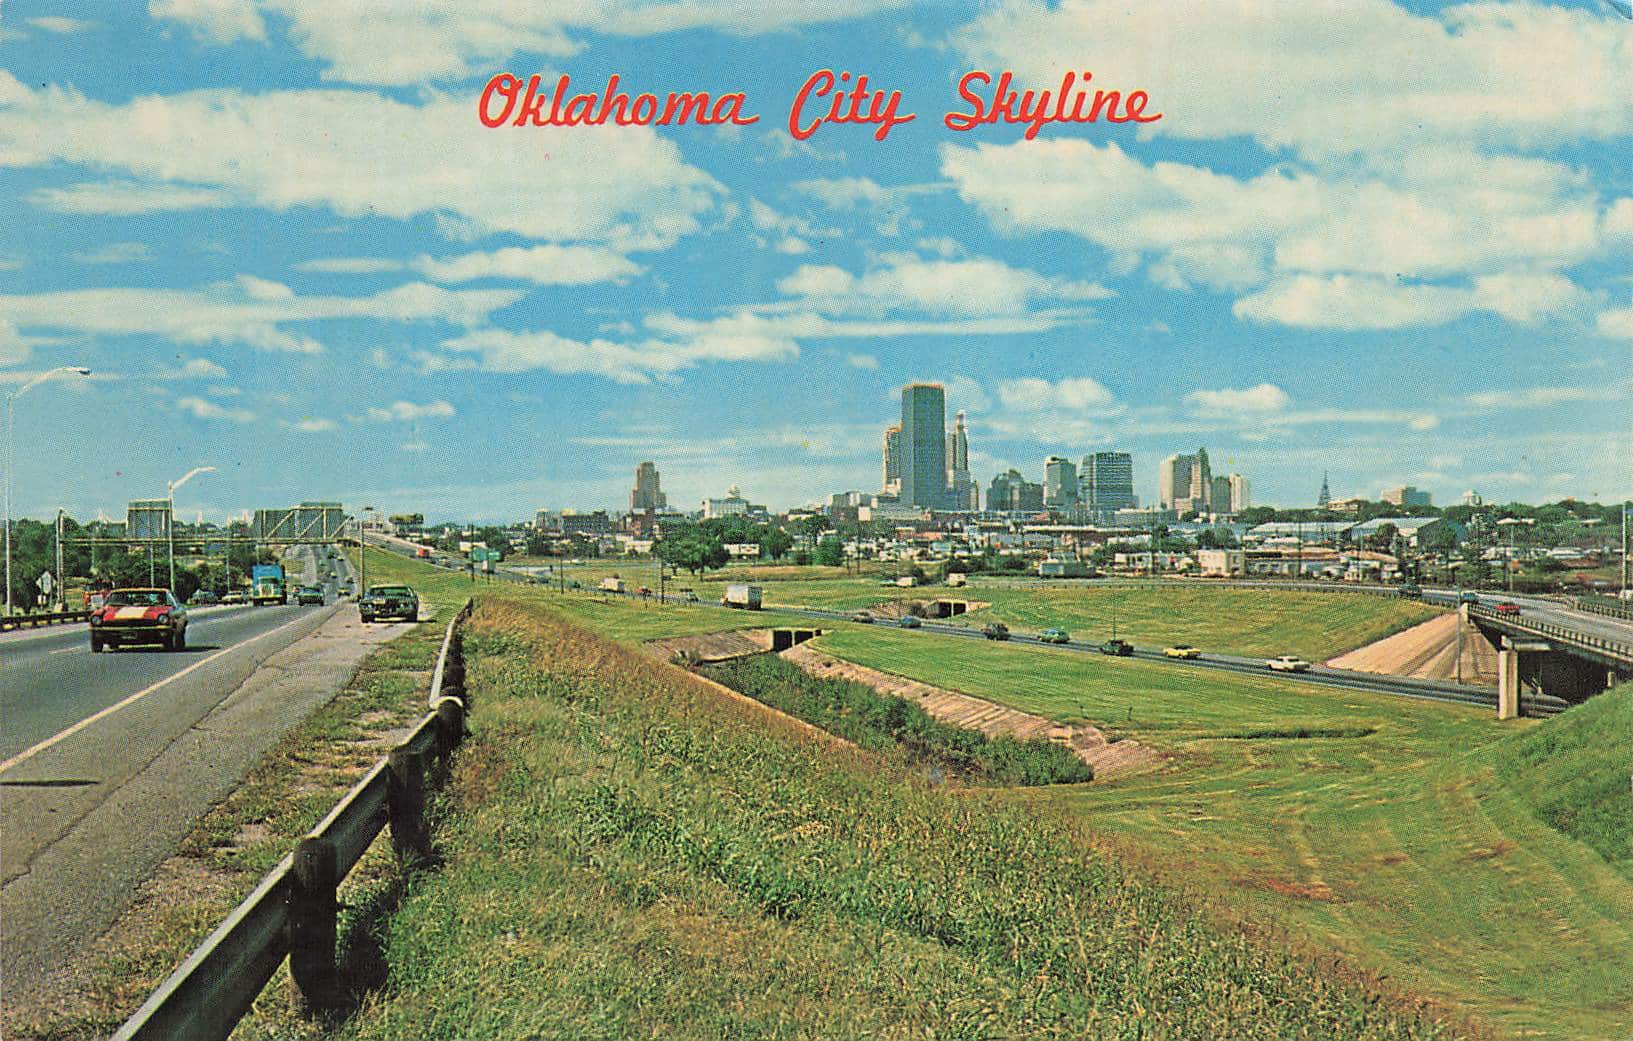 A postcard with a photo of the Oklahoma City skyline in 1972.